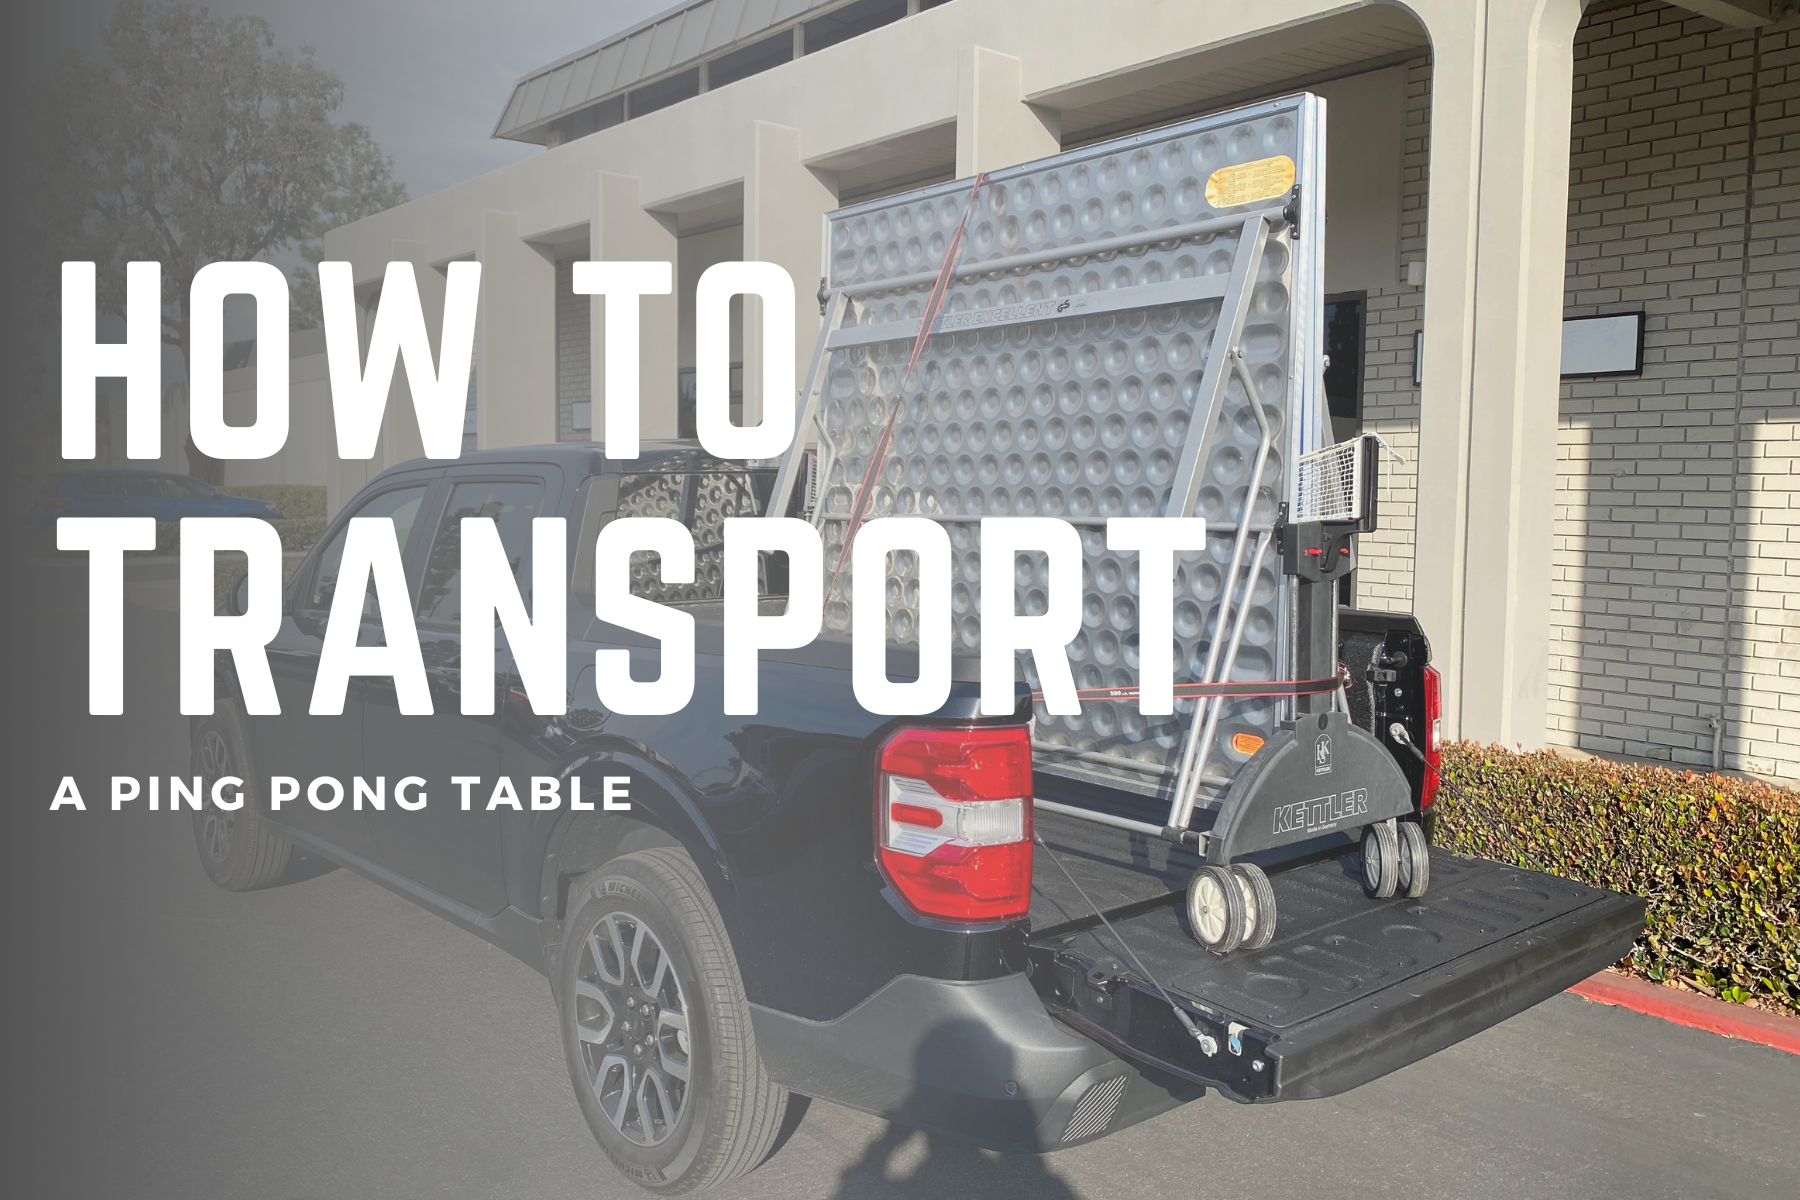 How To Transport A Ping Pong Table - Protecting The Play